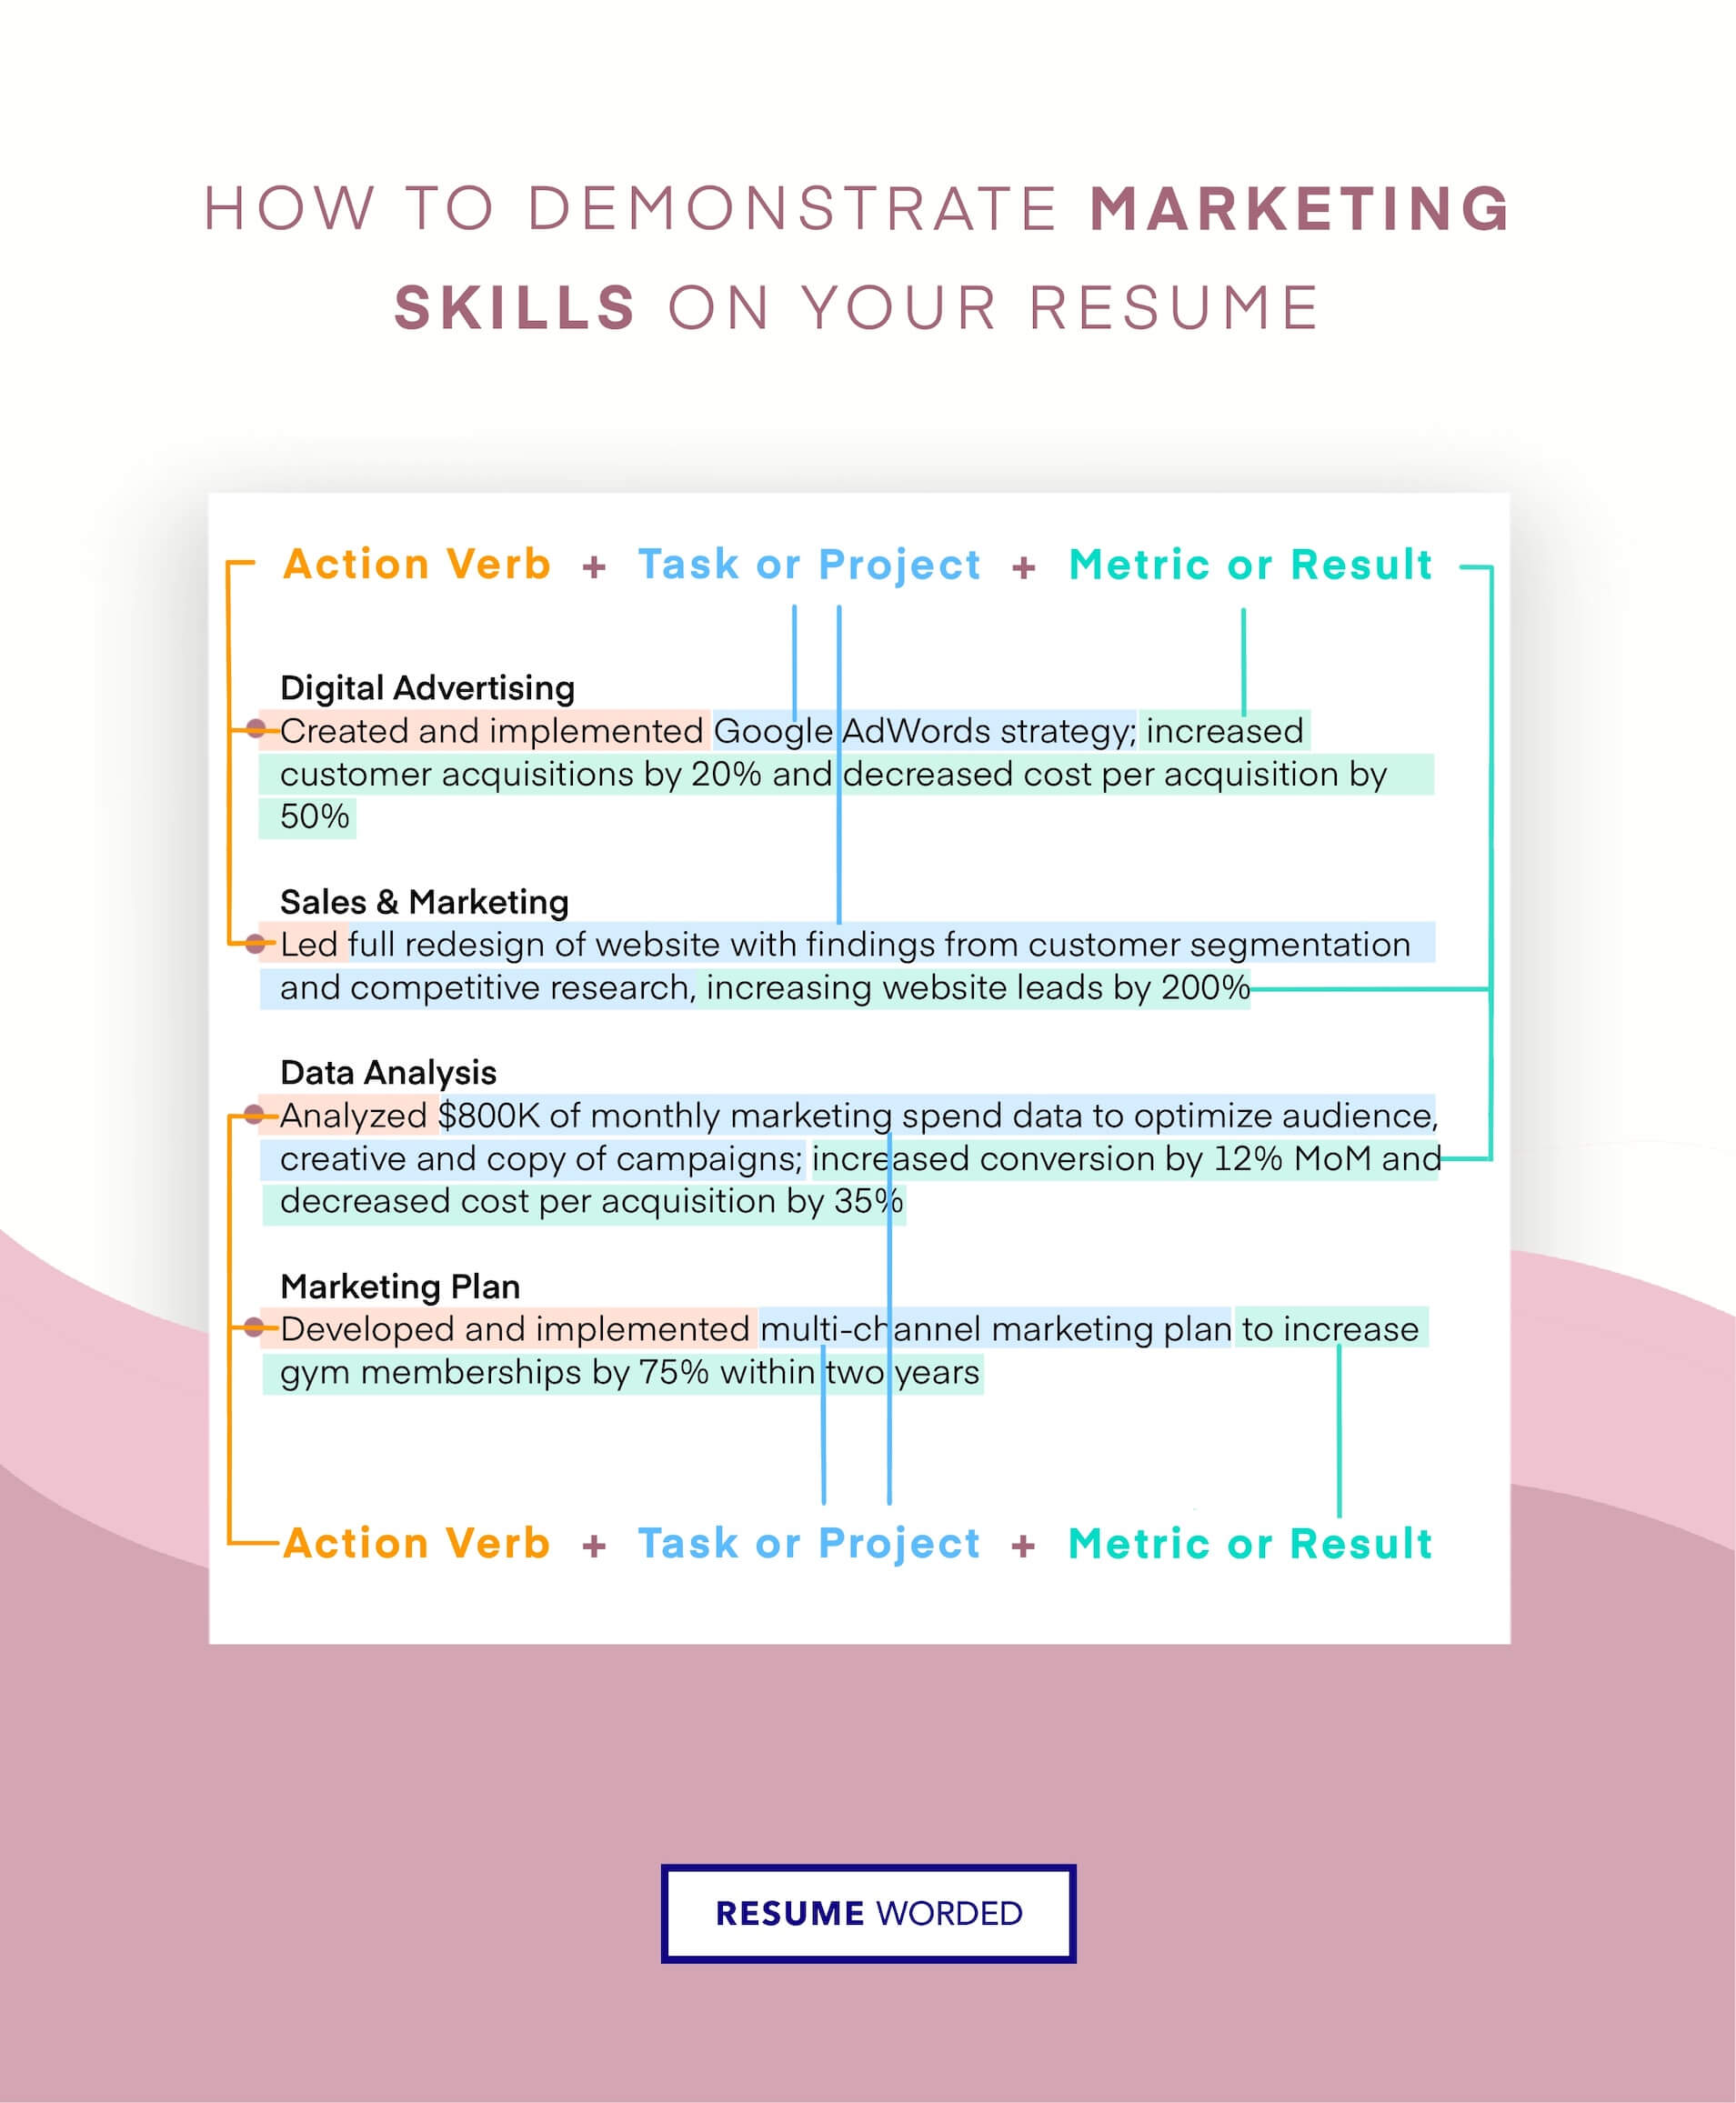 Uses specific metrics to measure achievements in the marketing industry - Marketing Manager Resume